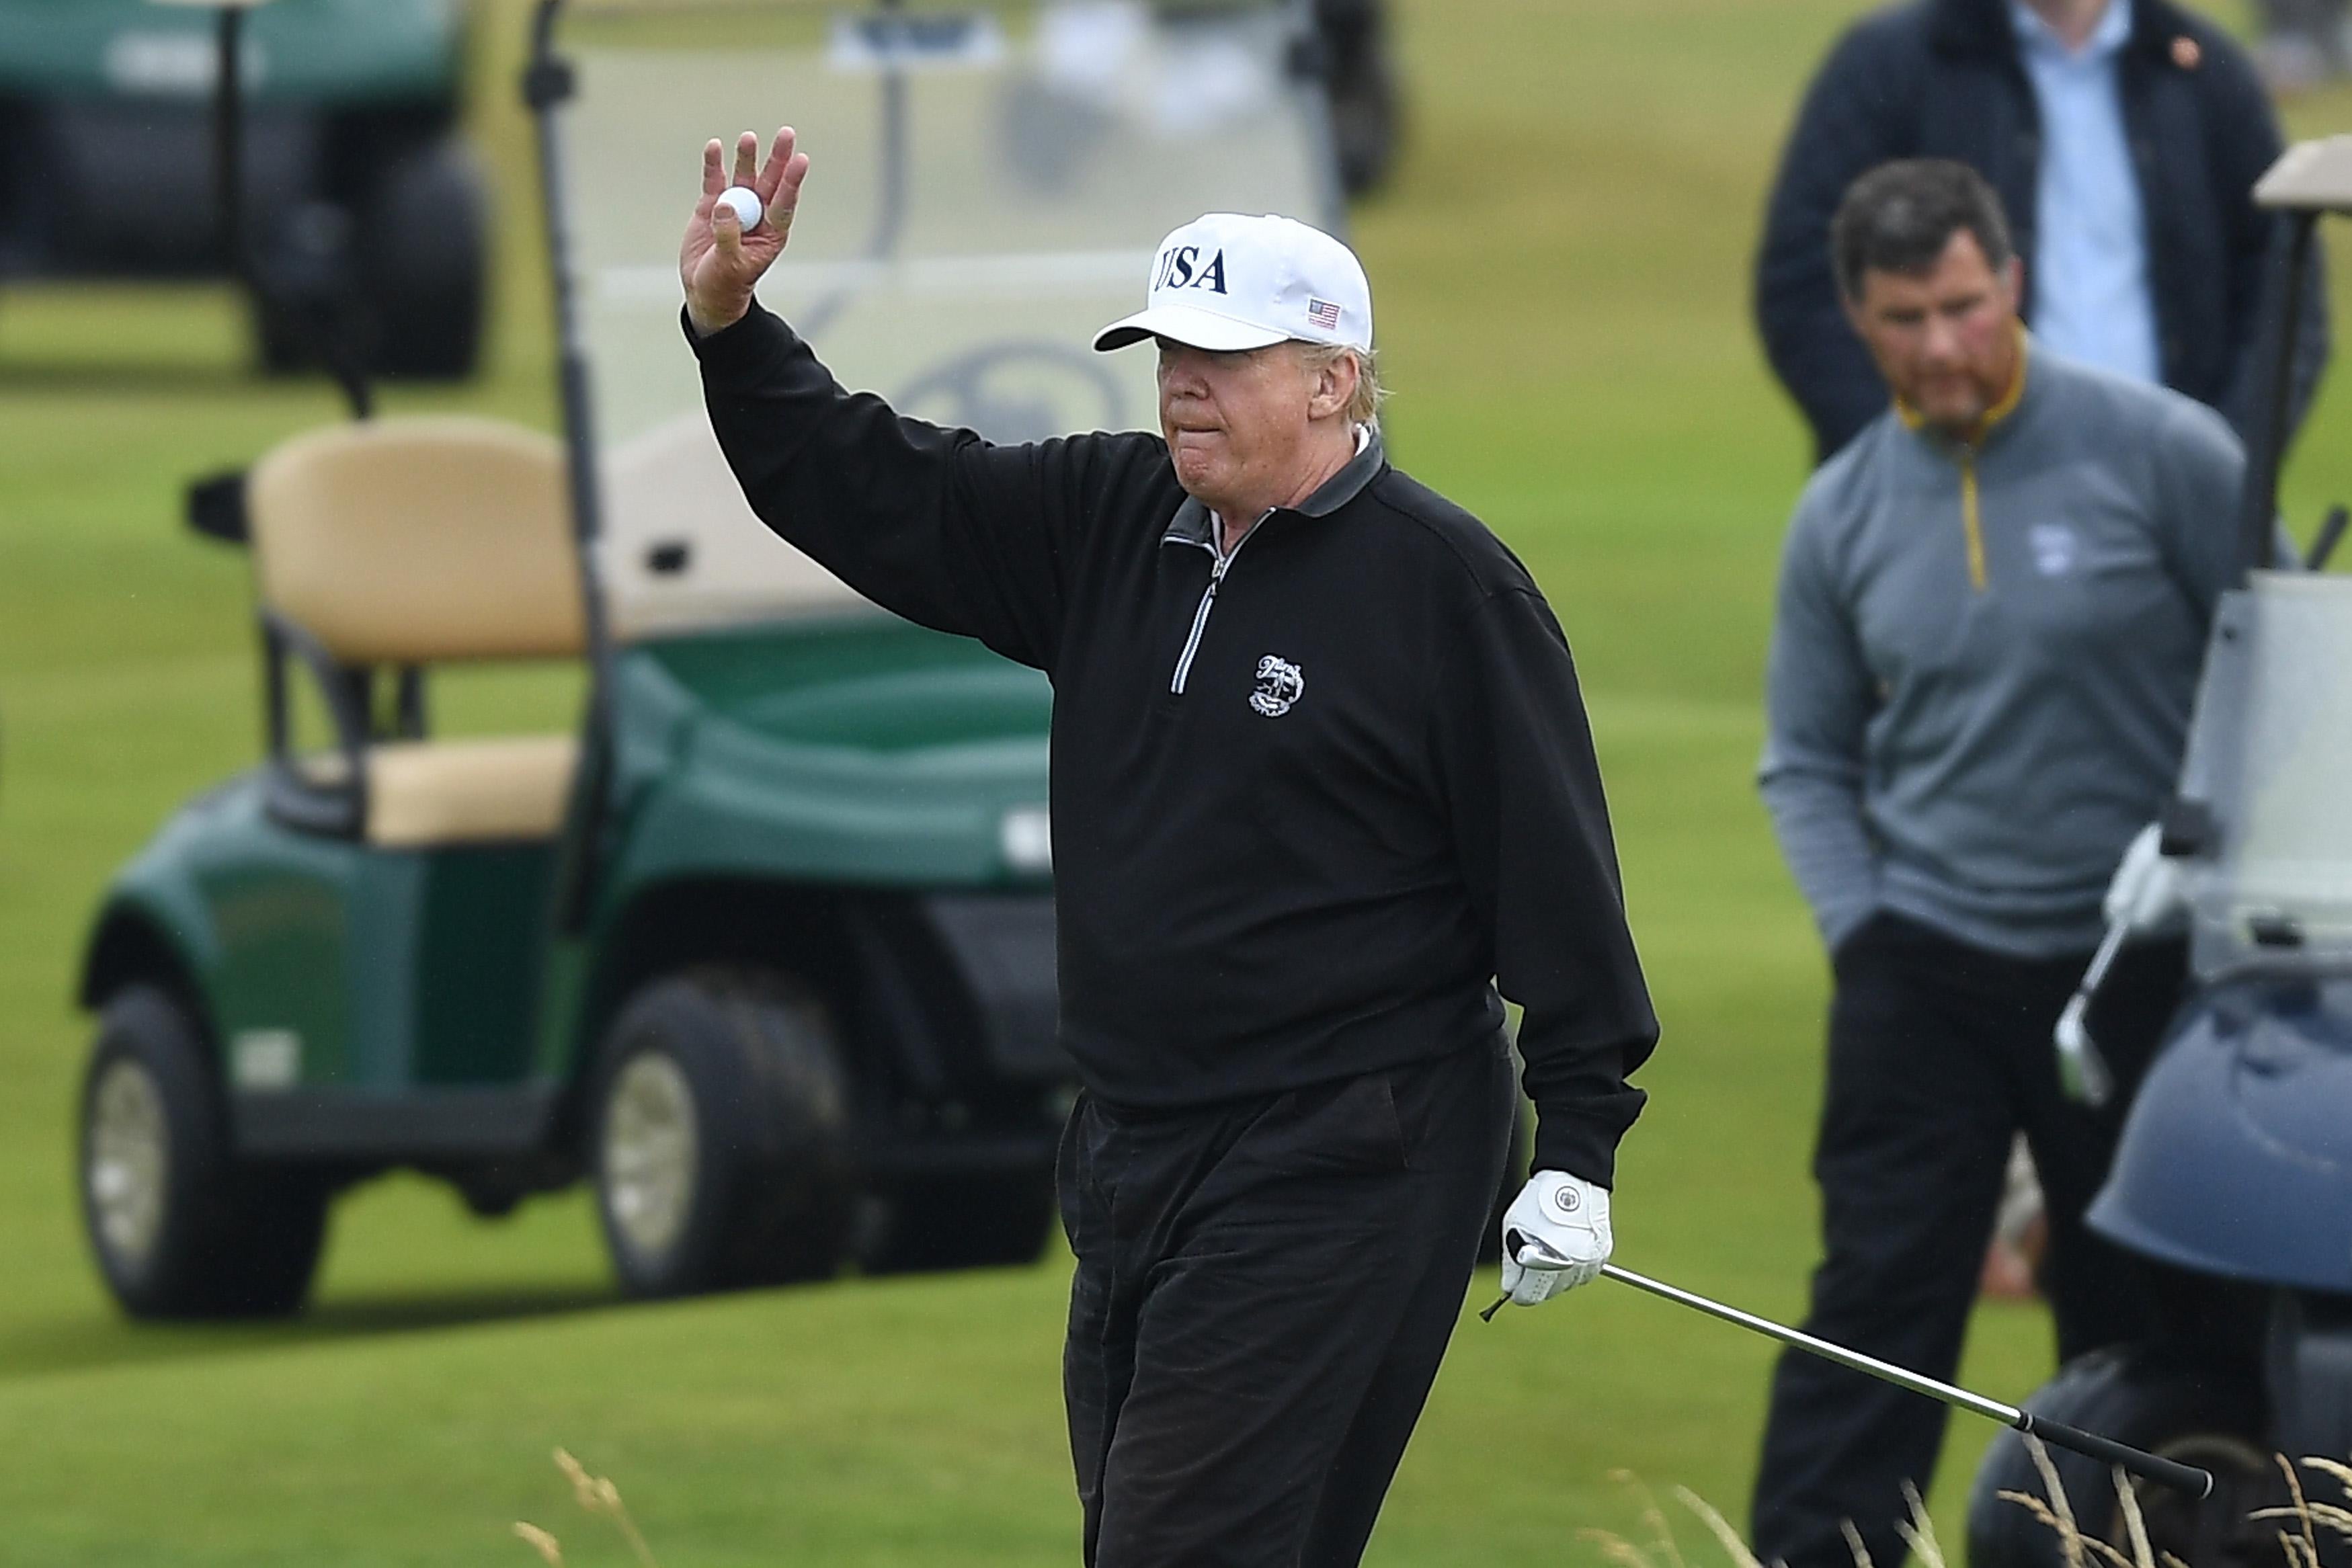 President Donald Trump waves while playing a round of golf at Trump Turnberry Luxury Collection Resort on July 15, 2018 in Turnberry, Scotland. 